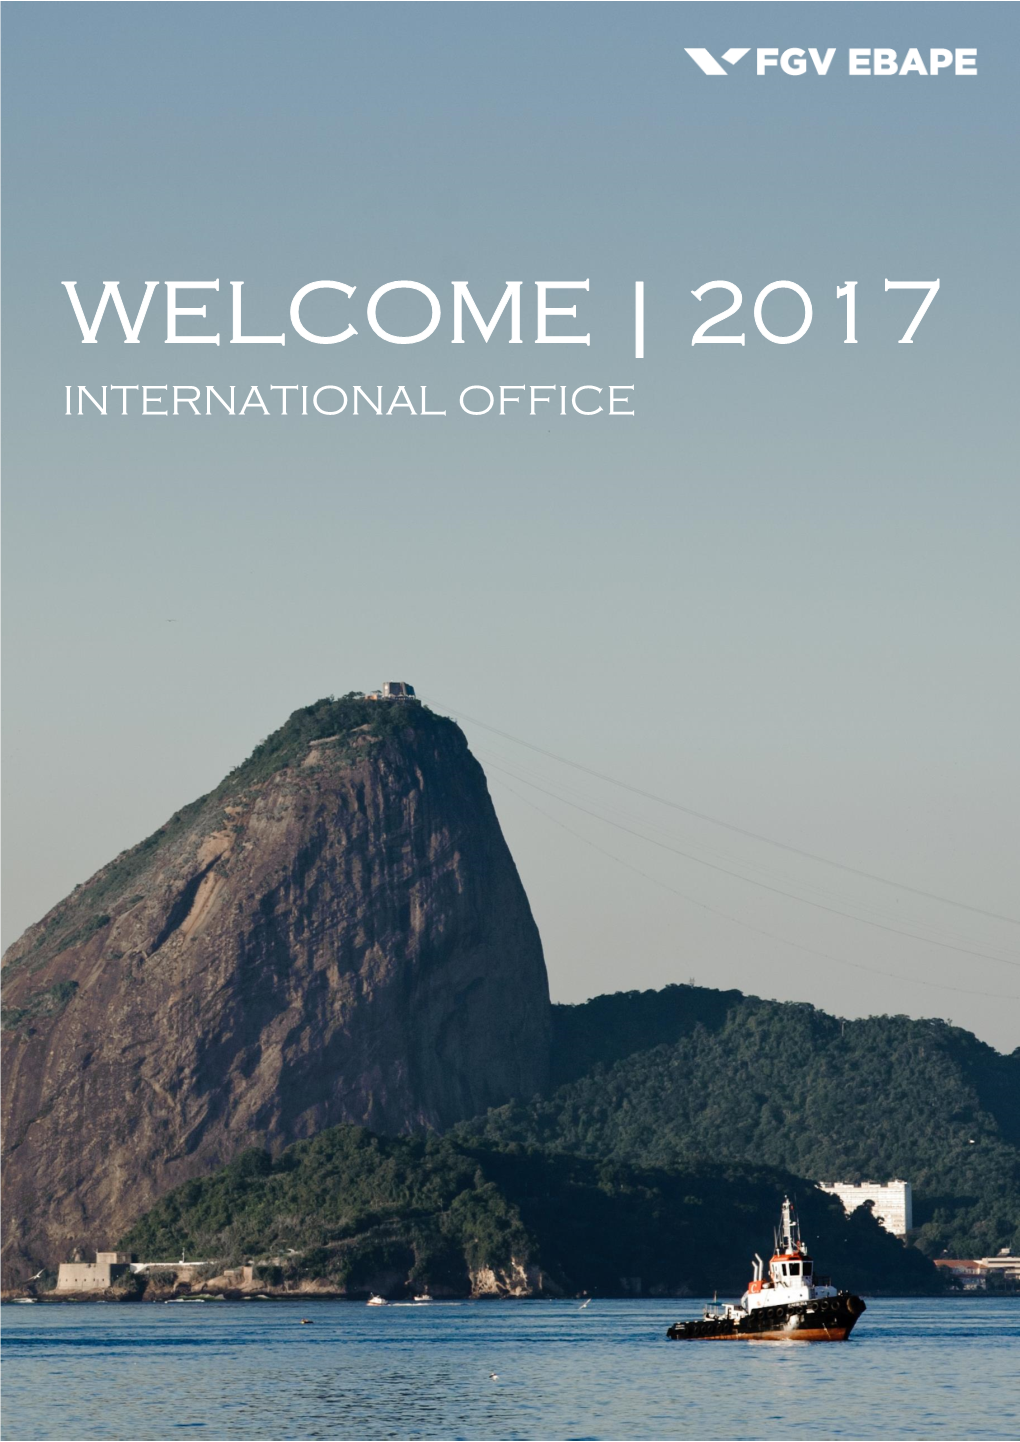 Welcome | 2017 International Office